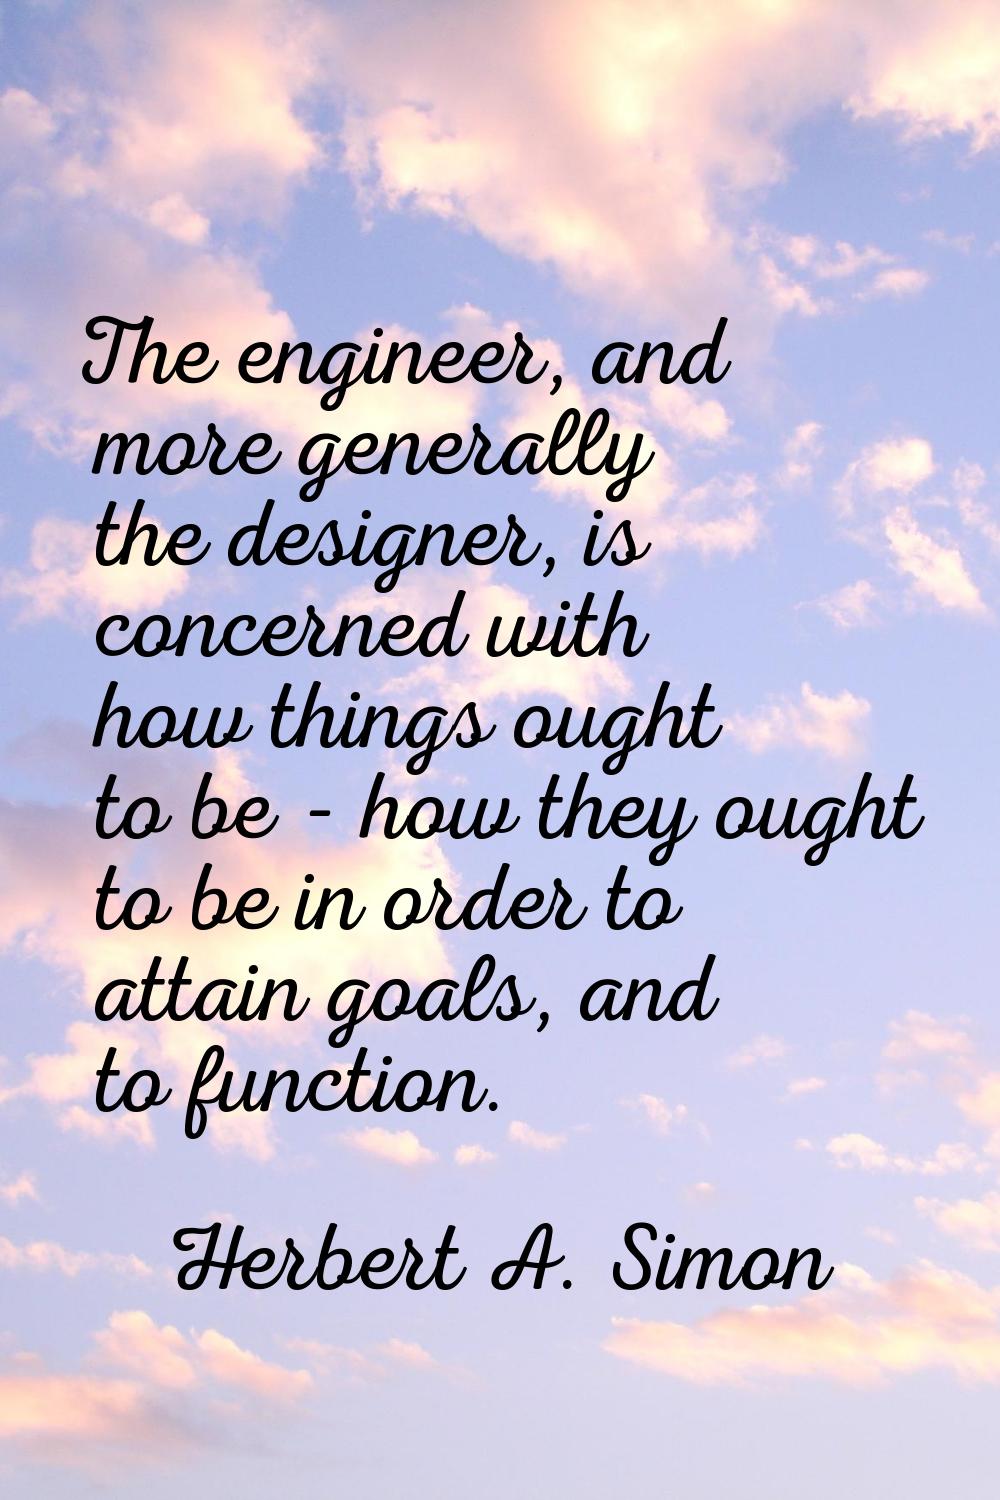 The engineer, and more generally the designer, is concerned with how things ought to be - how they 